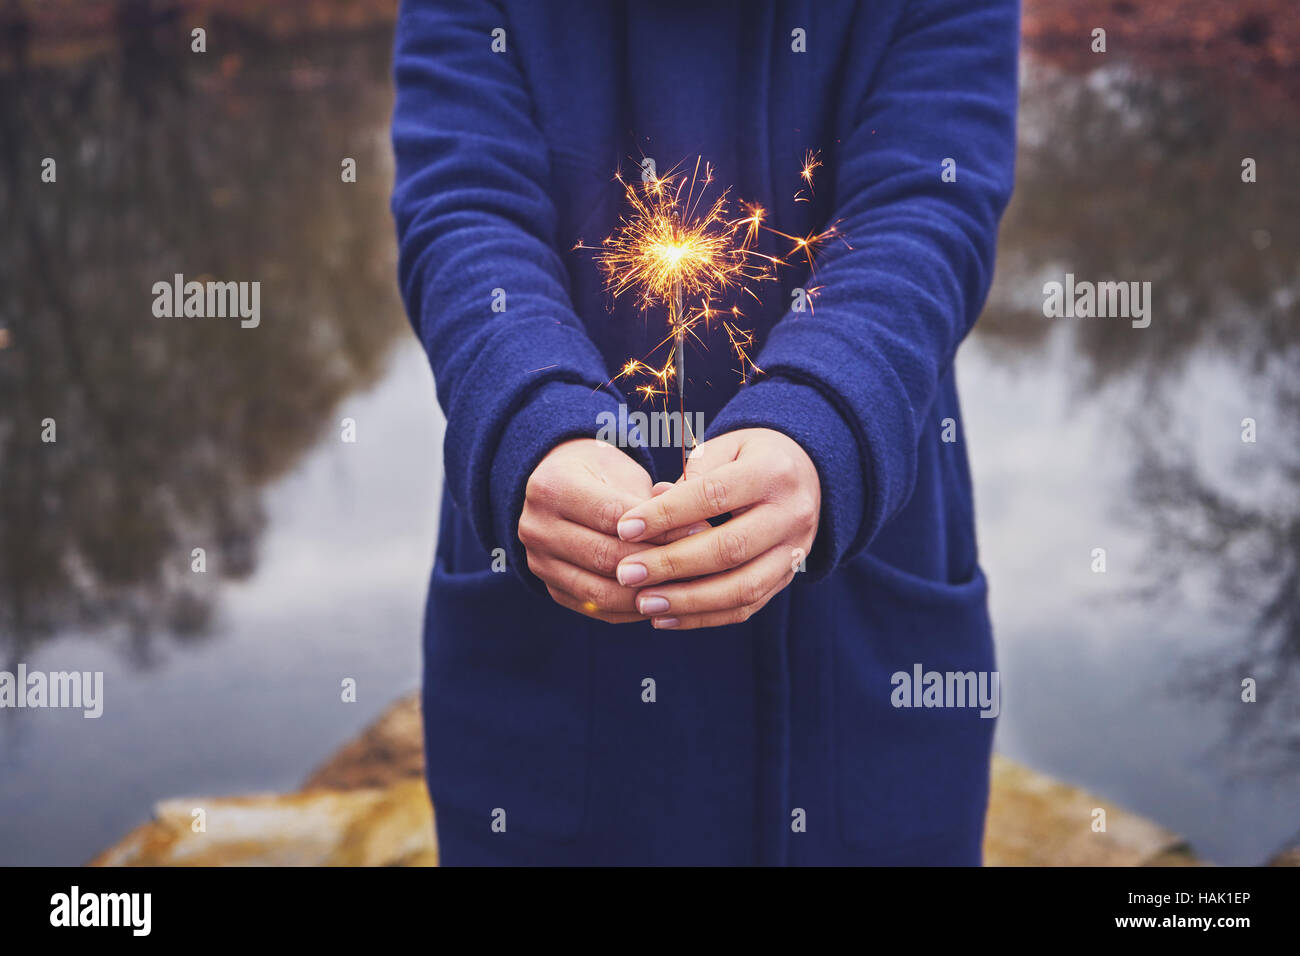 Woman holding sparkler in forest, winter day Stock Photo